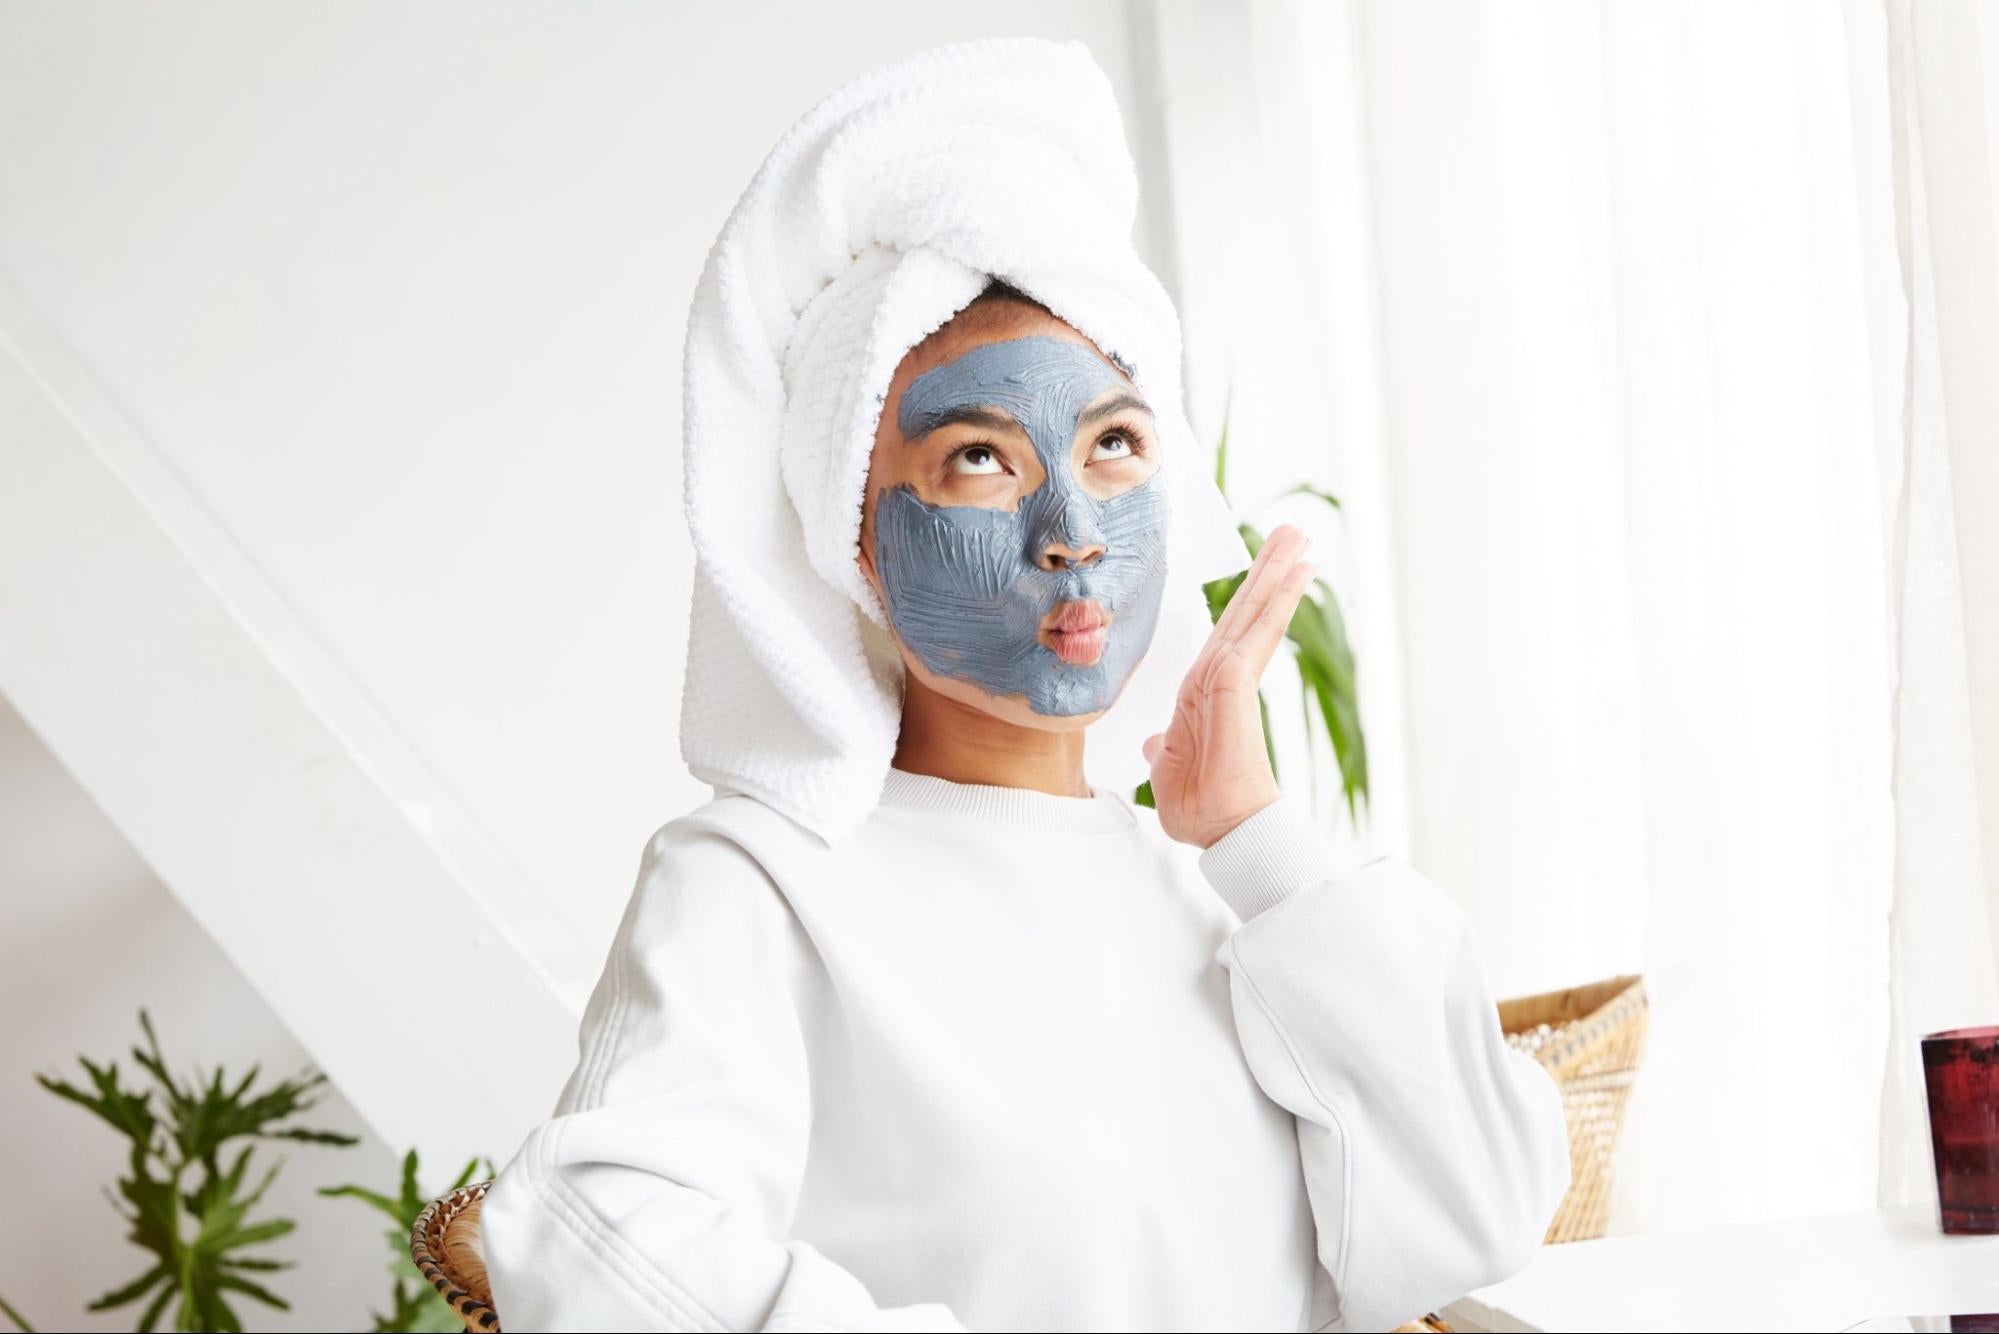 Girl in towel with a face mask making a funny face